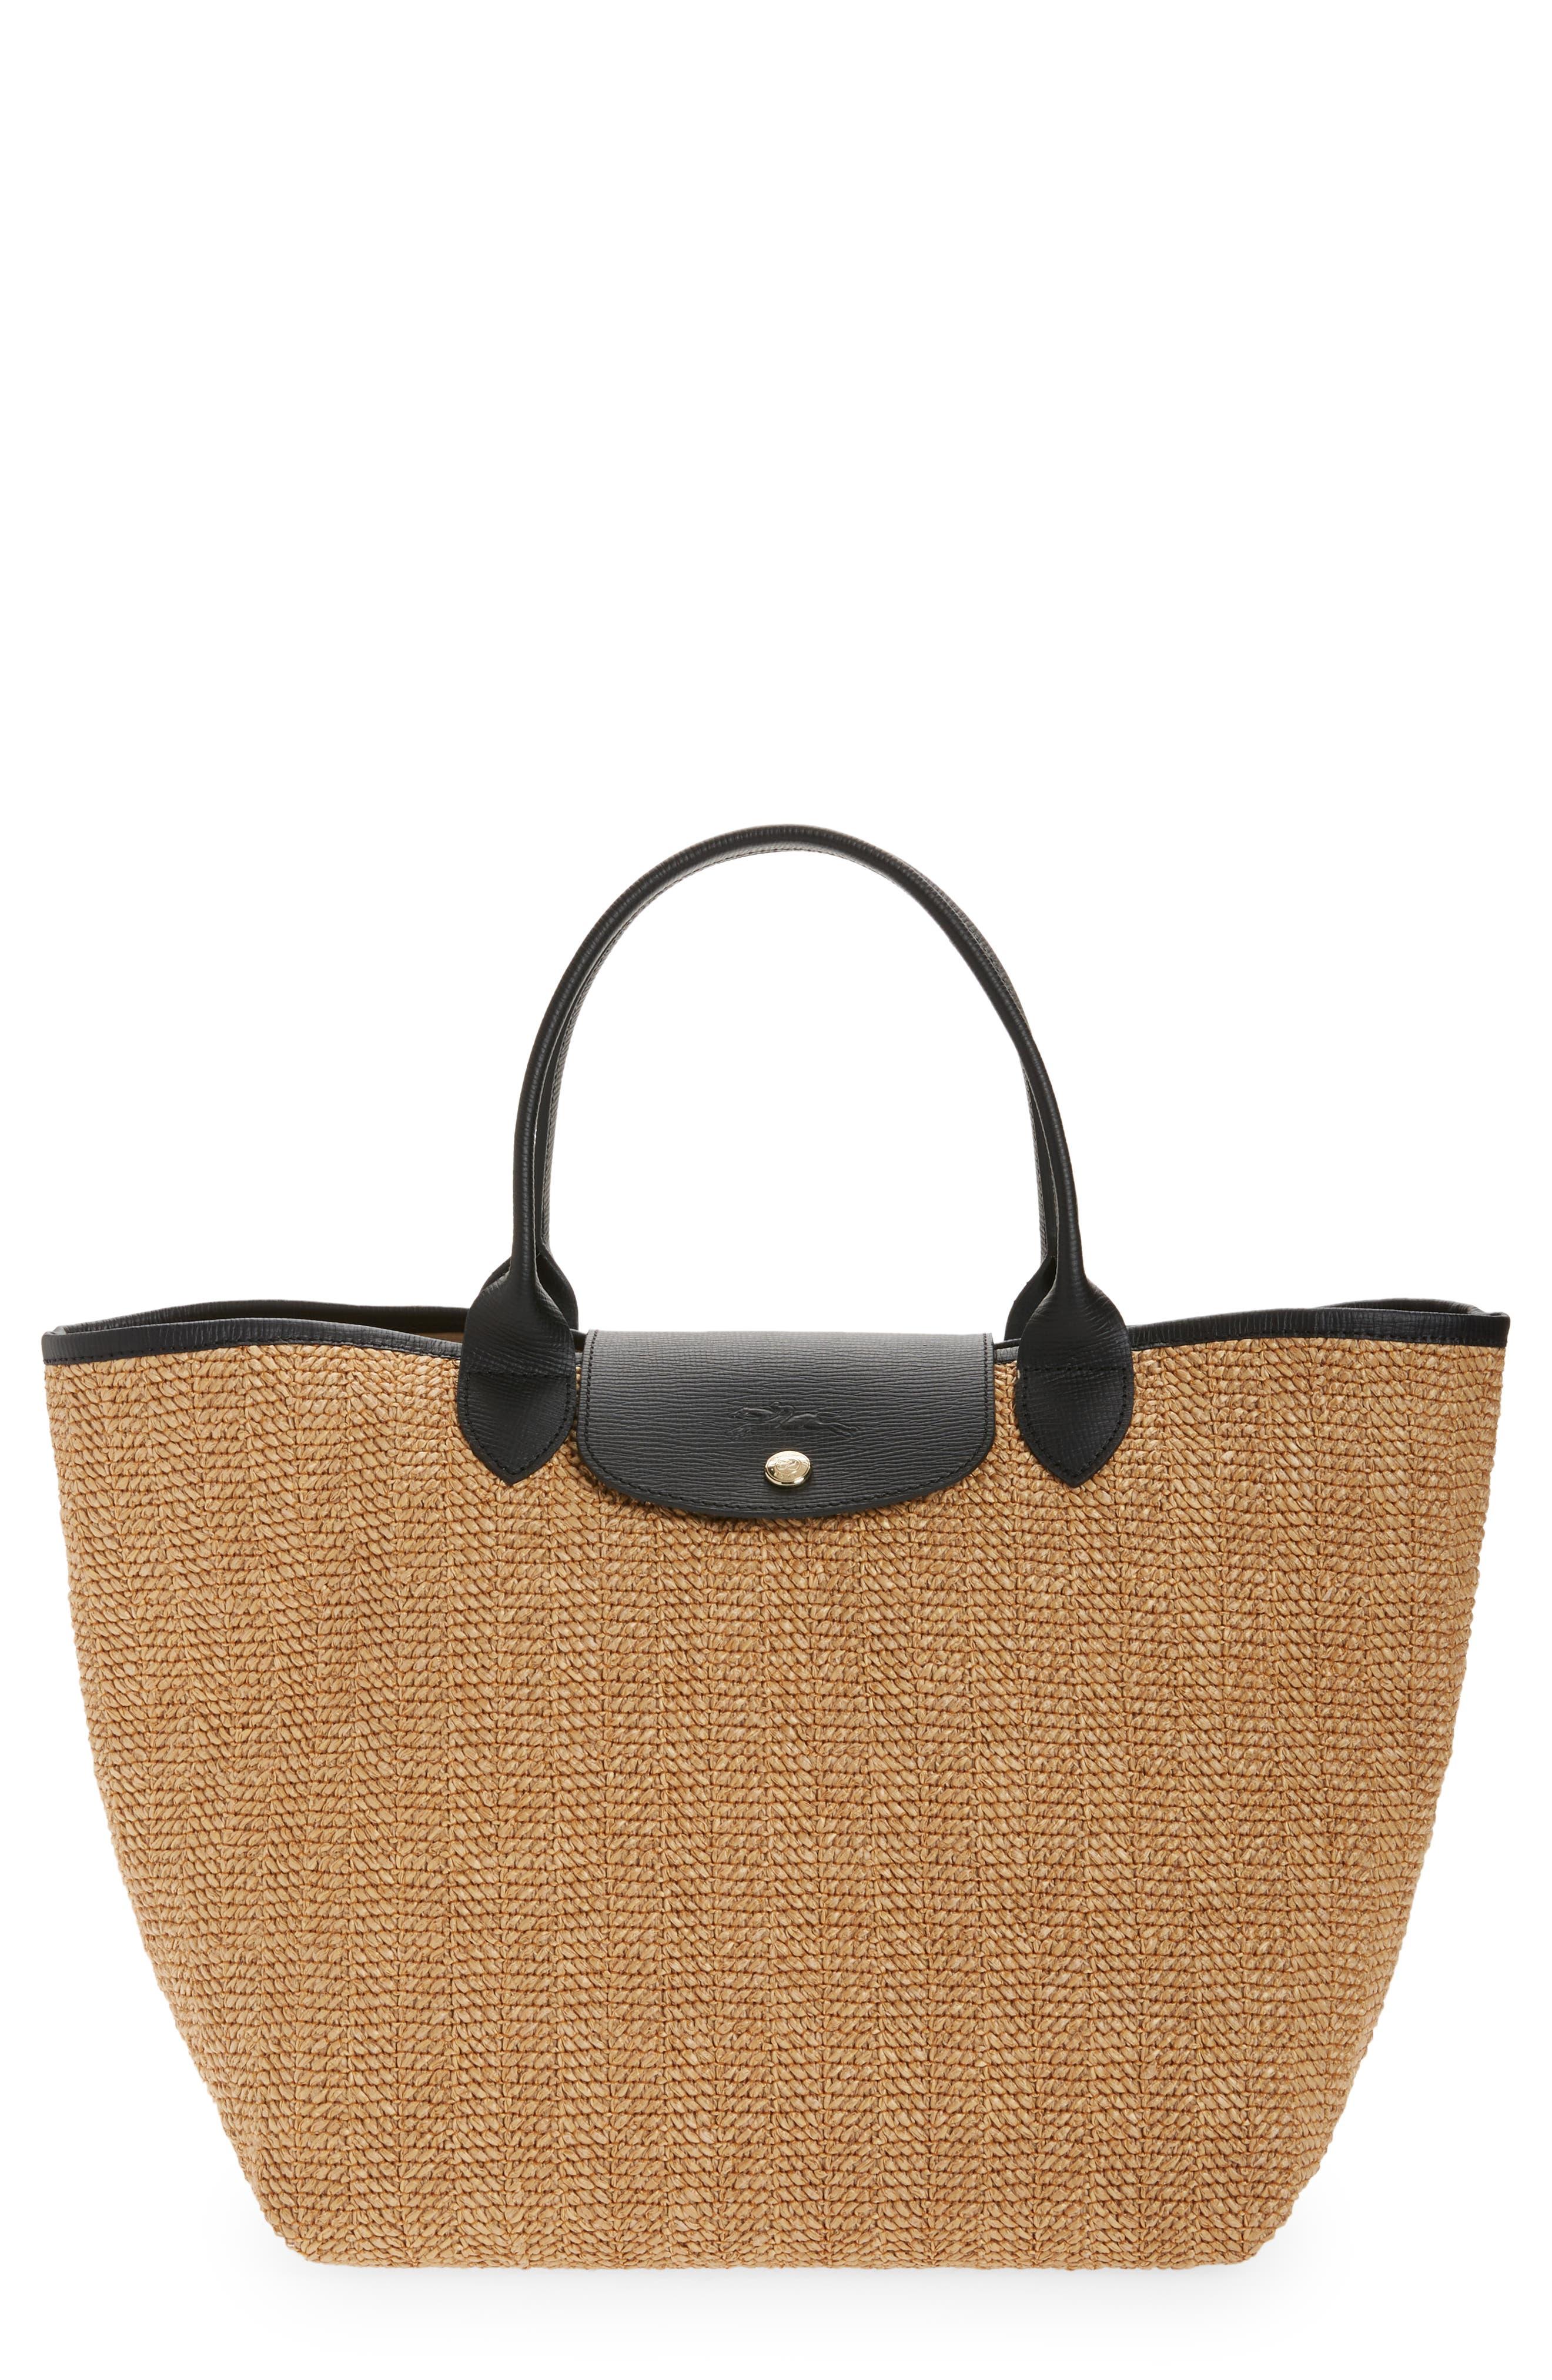 Longchamp Paille Straw Tote in Brown | Lyst